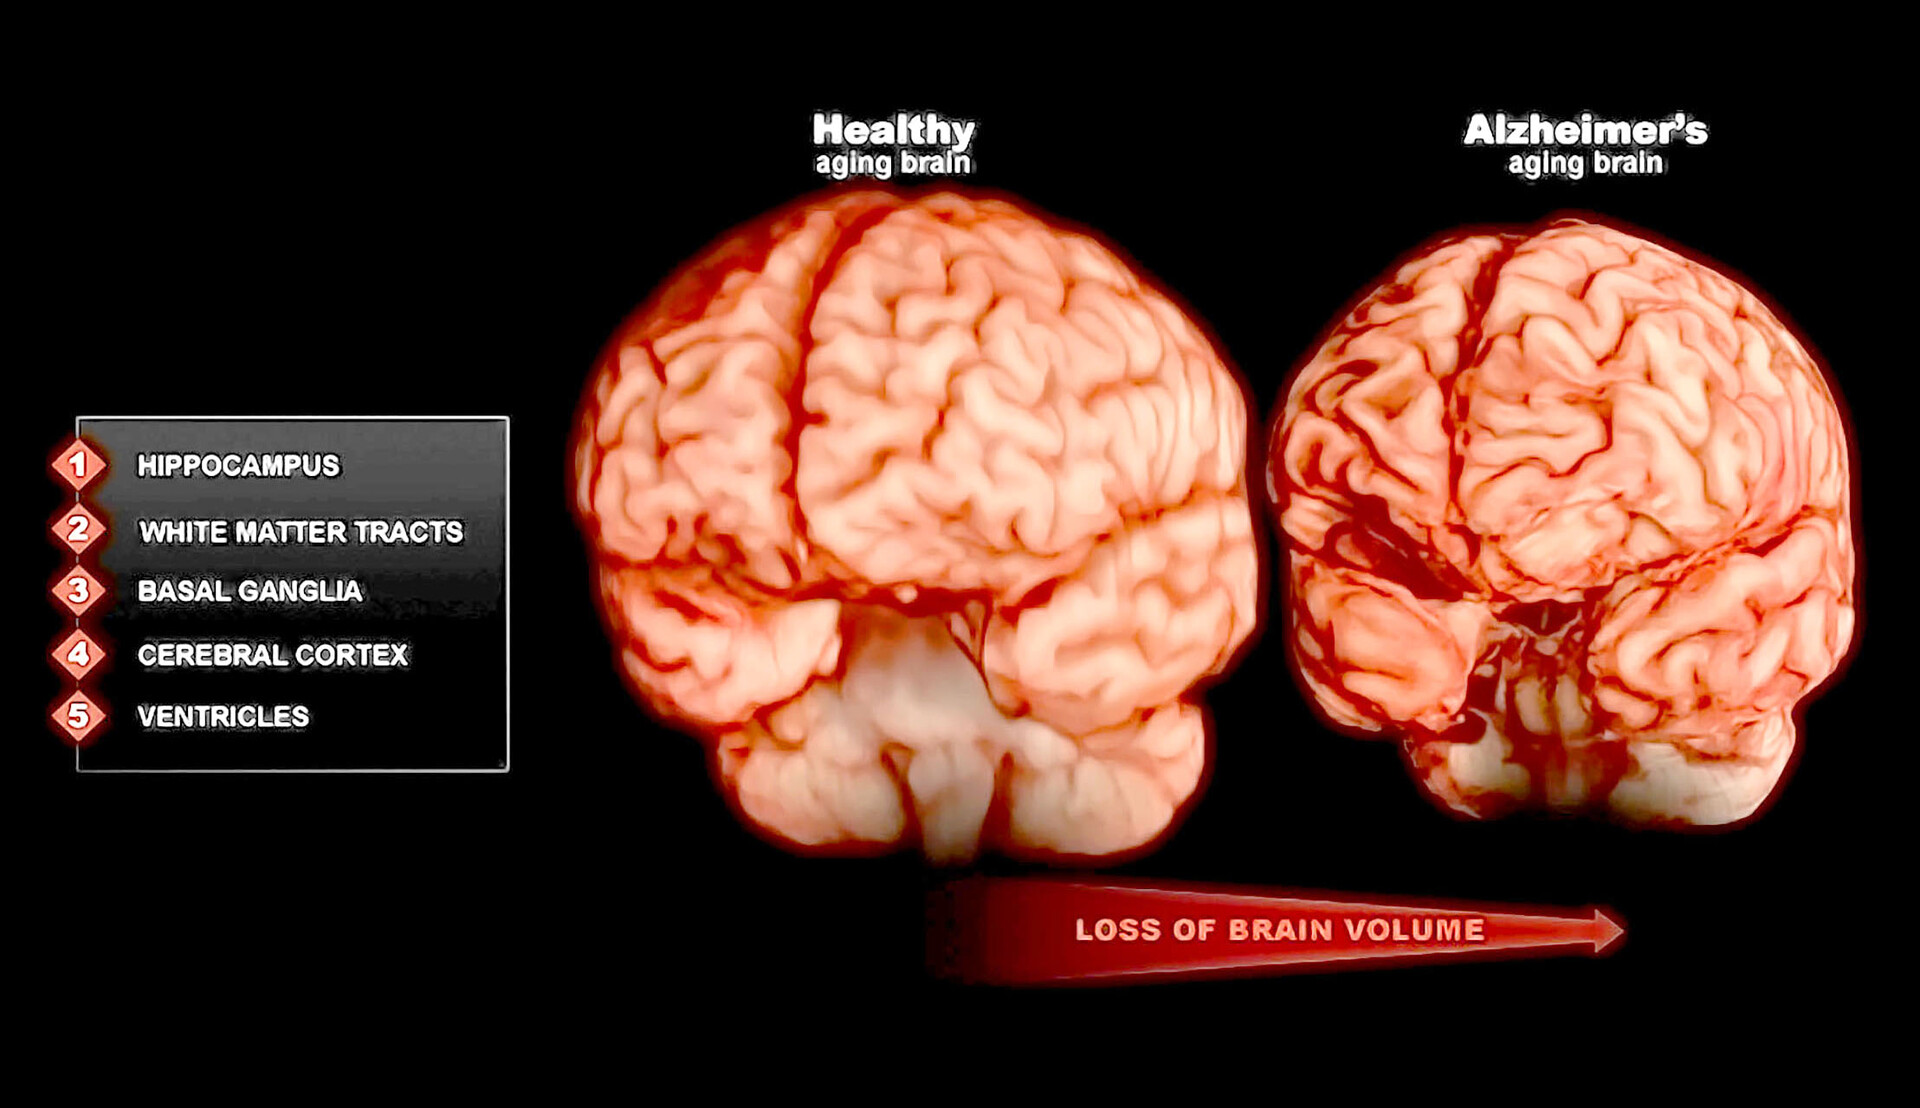 Brain health and aging